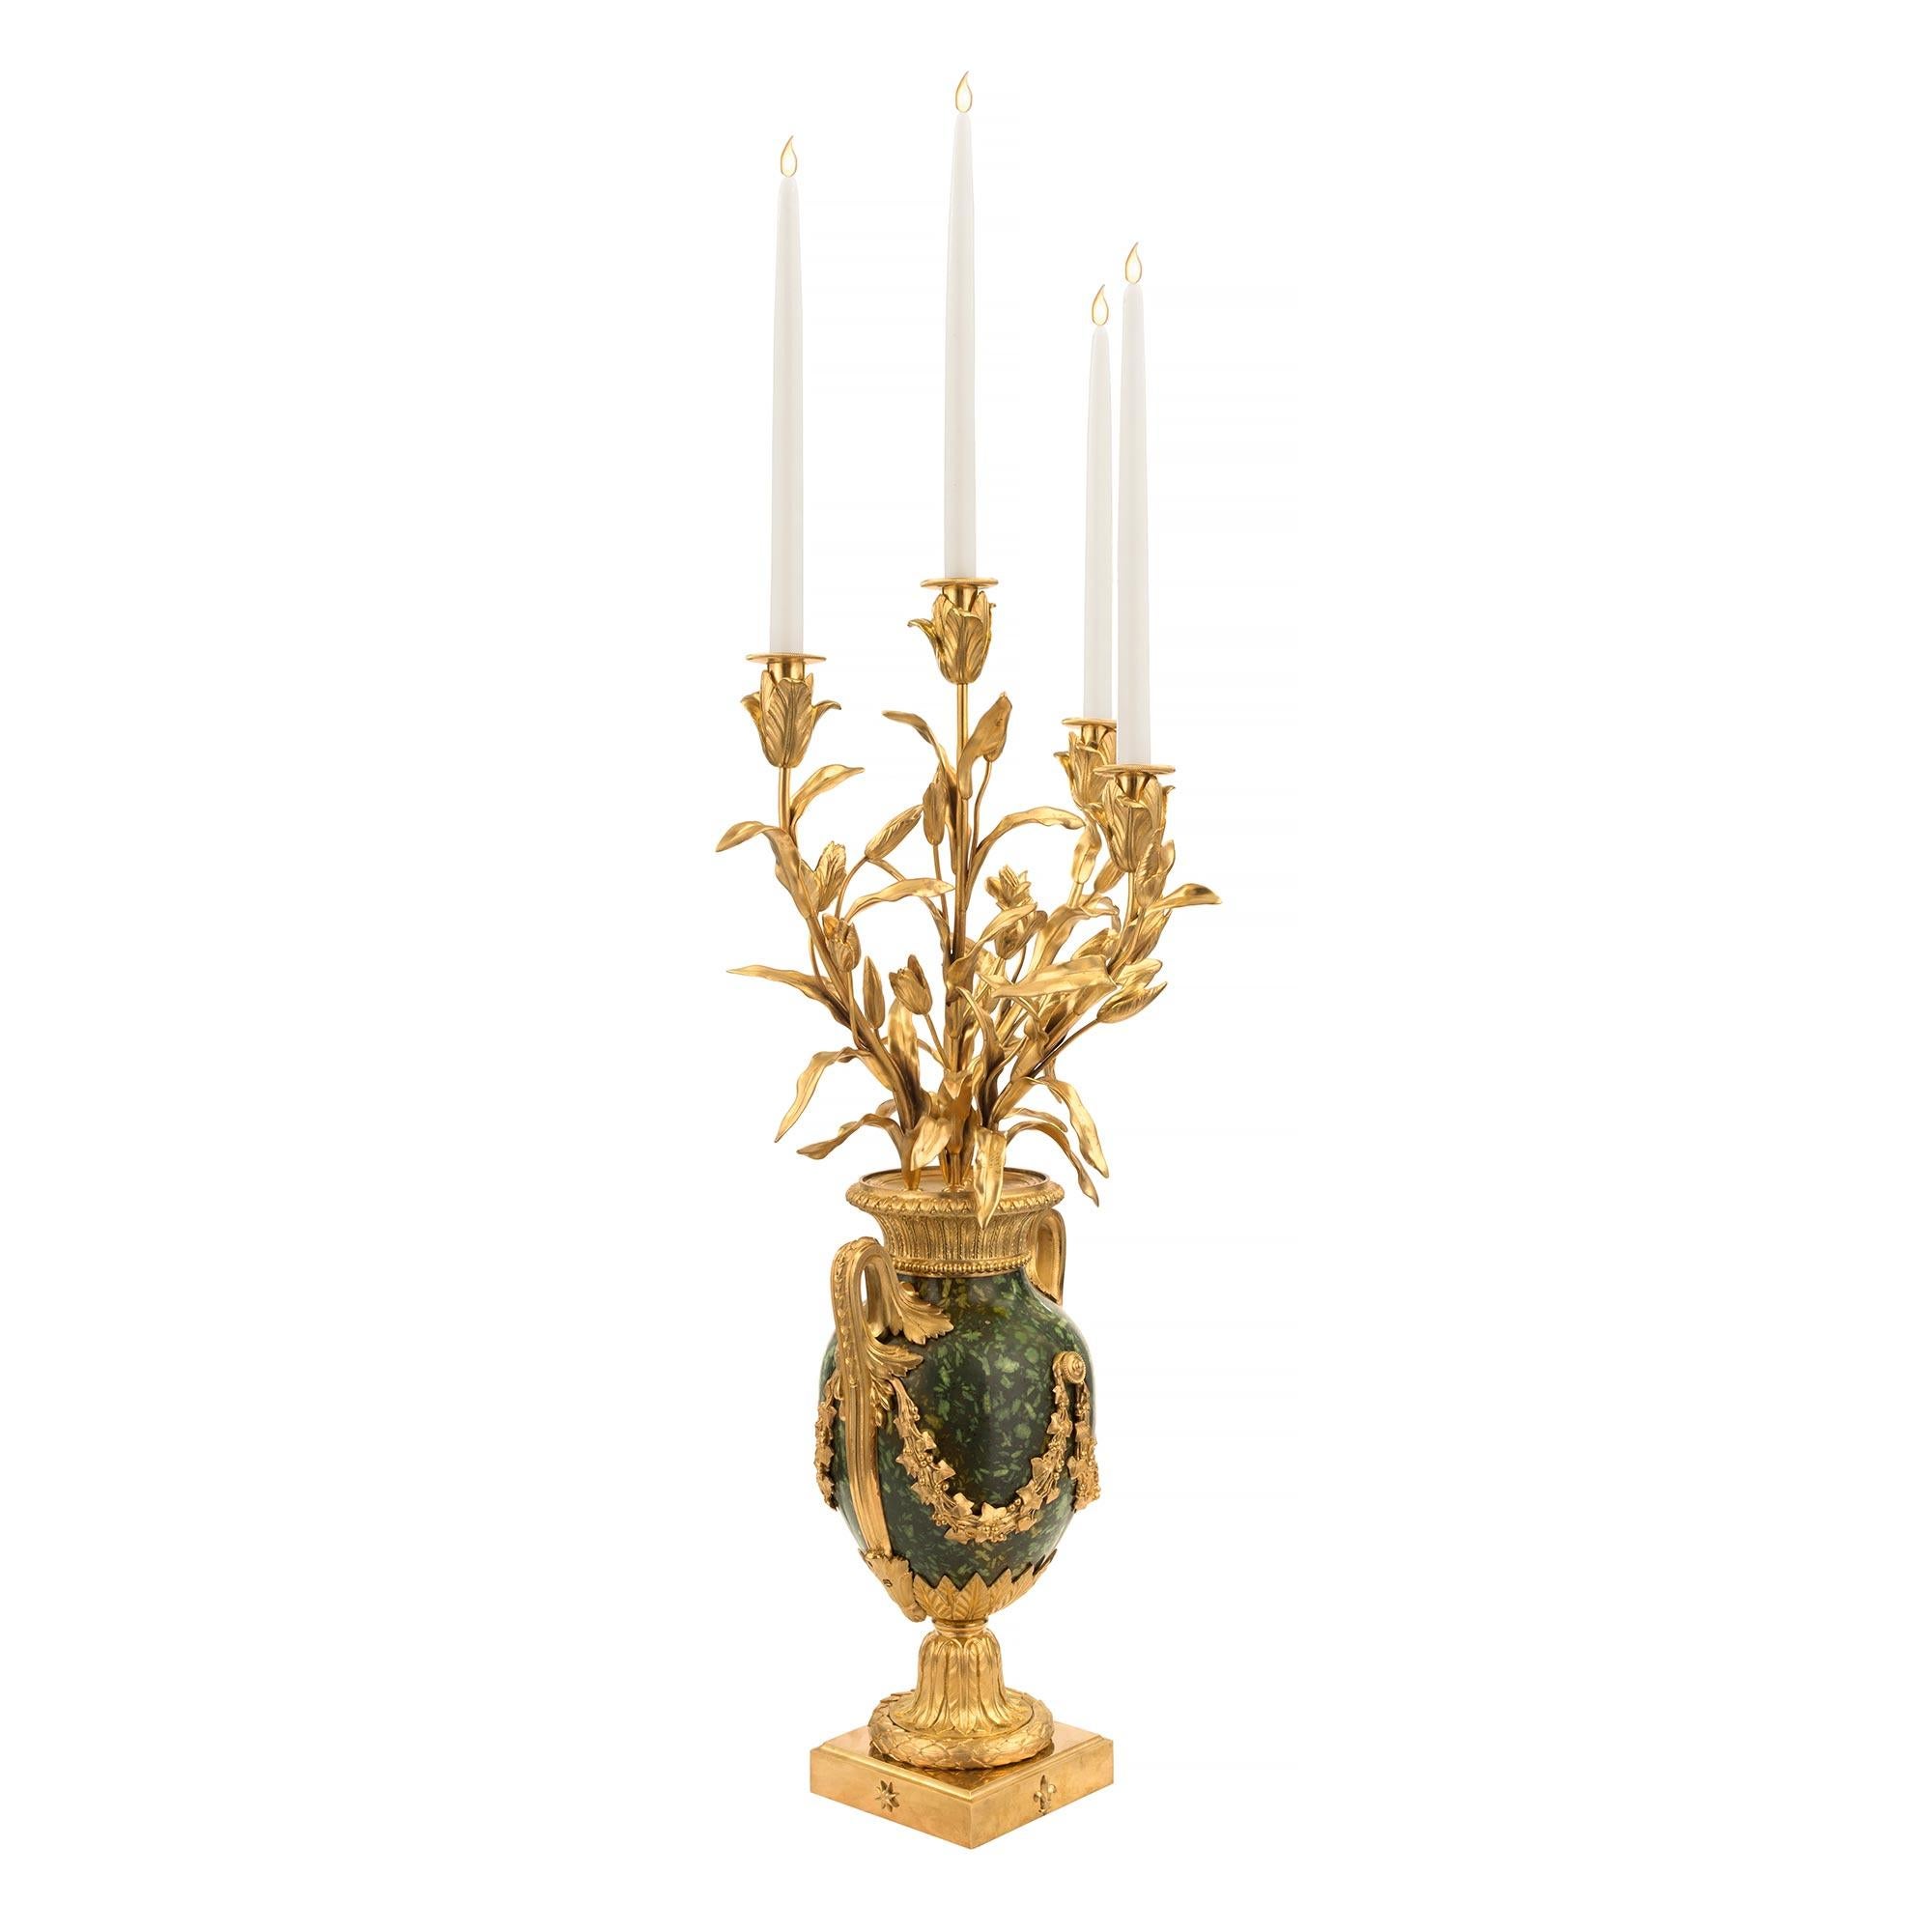 A sensational and extremely high quality pair of French 19th century Louis XVI st. ormolu and green Porphyry, four arm candelabras. Each large scale candelabra is raised by a square ormolu base with an elegant central Fleur de Lys and delicate stars